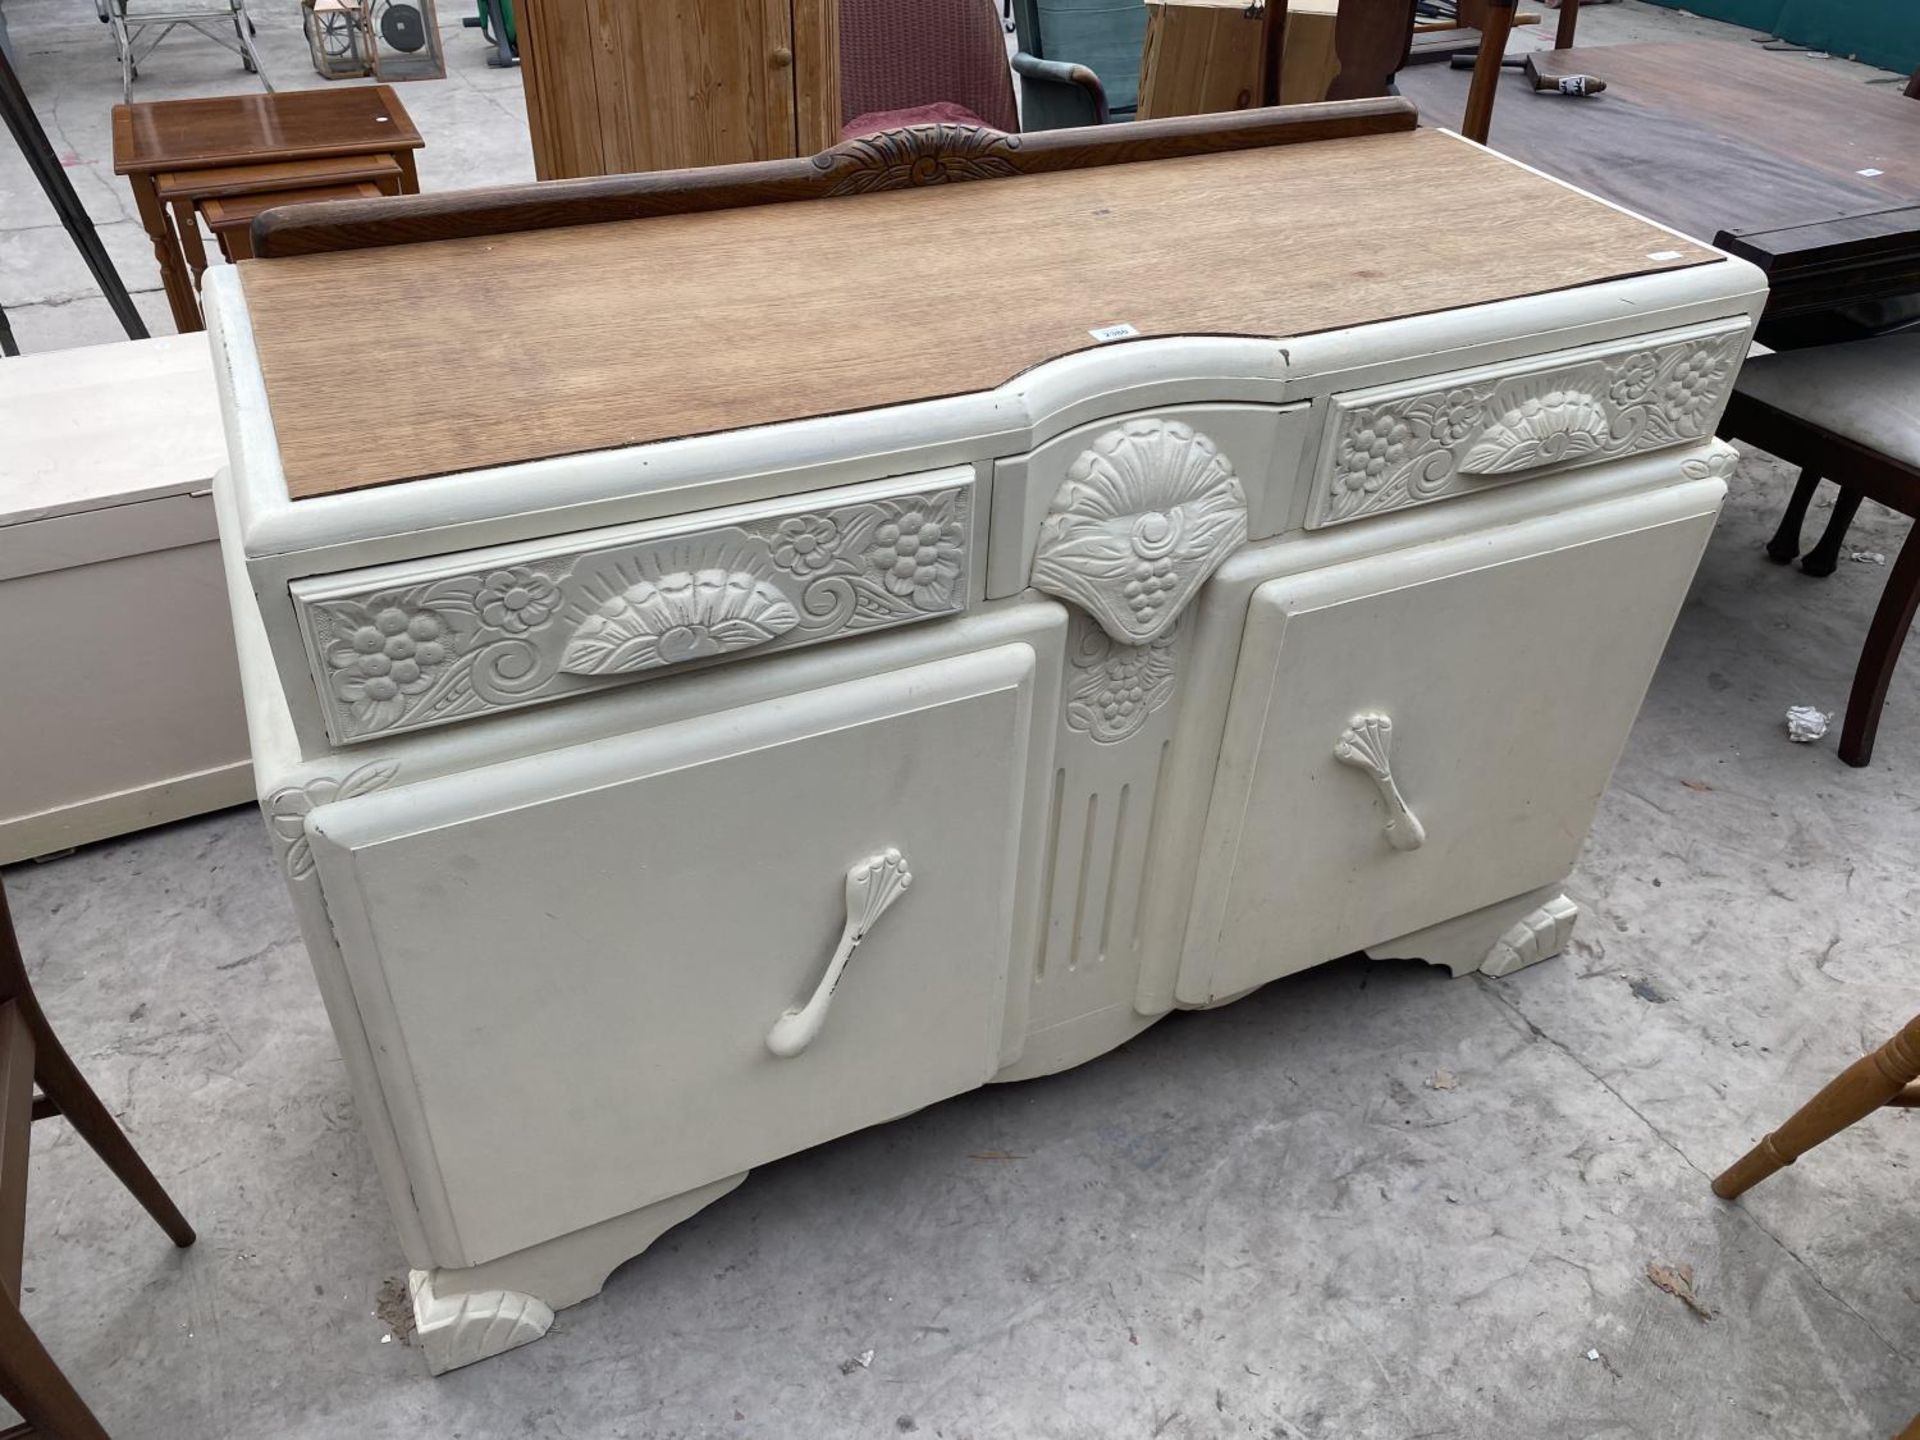 AN EARLY 20TH CENTURY OAK SIDEBOARD WITH SHABBY CHIC PAINTING, 54" WIDE